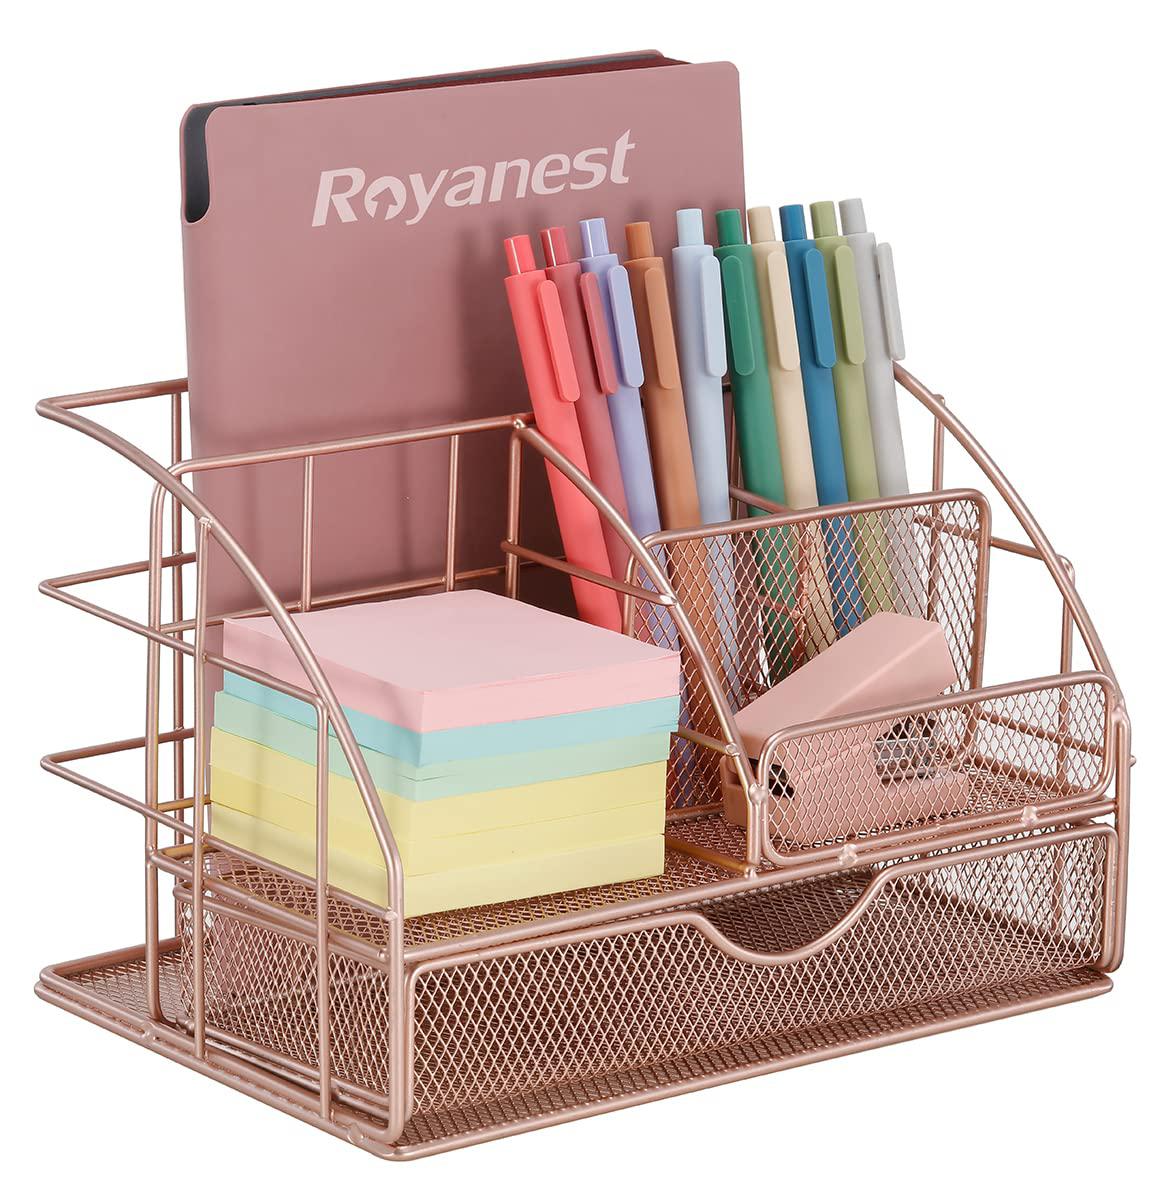 royanest desktop storage box with drawers, mesh desk organizer and accessories, used for home, school, cosmetics desktop orga